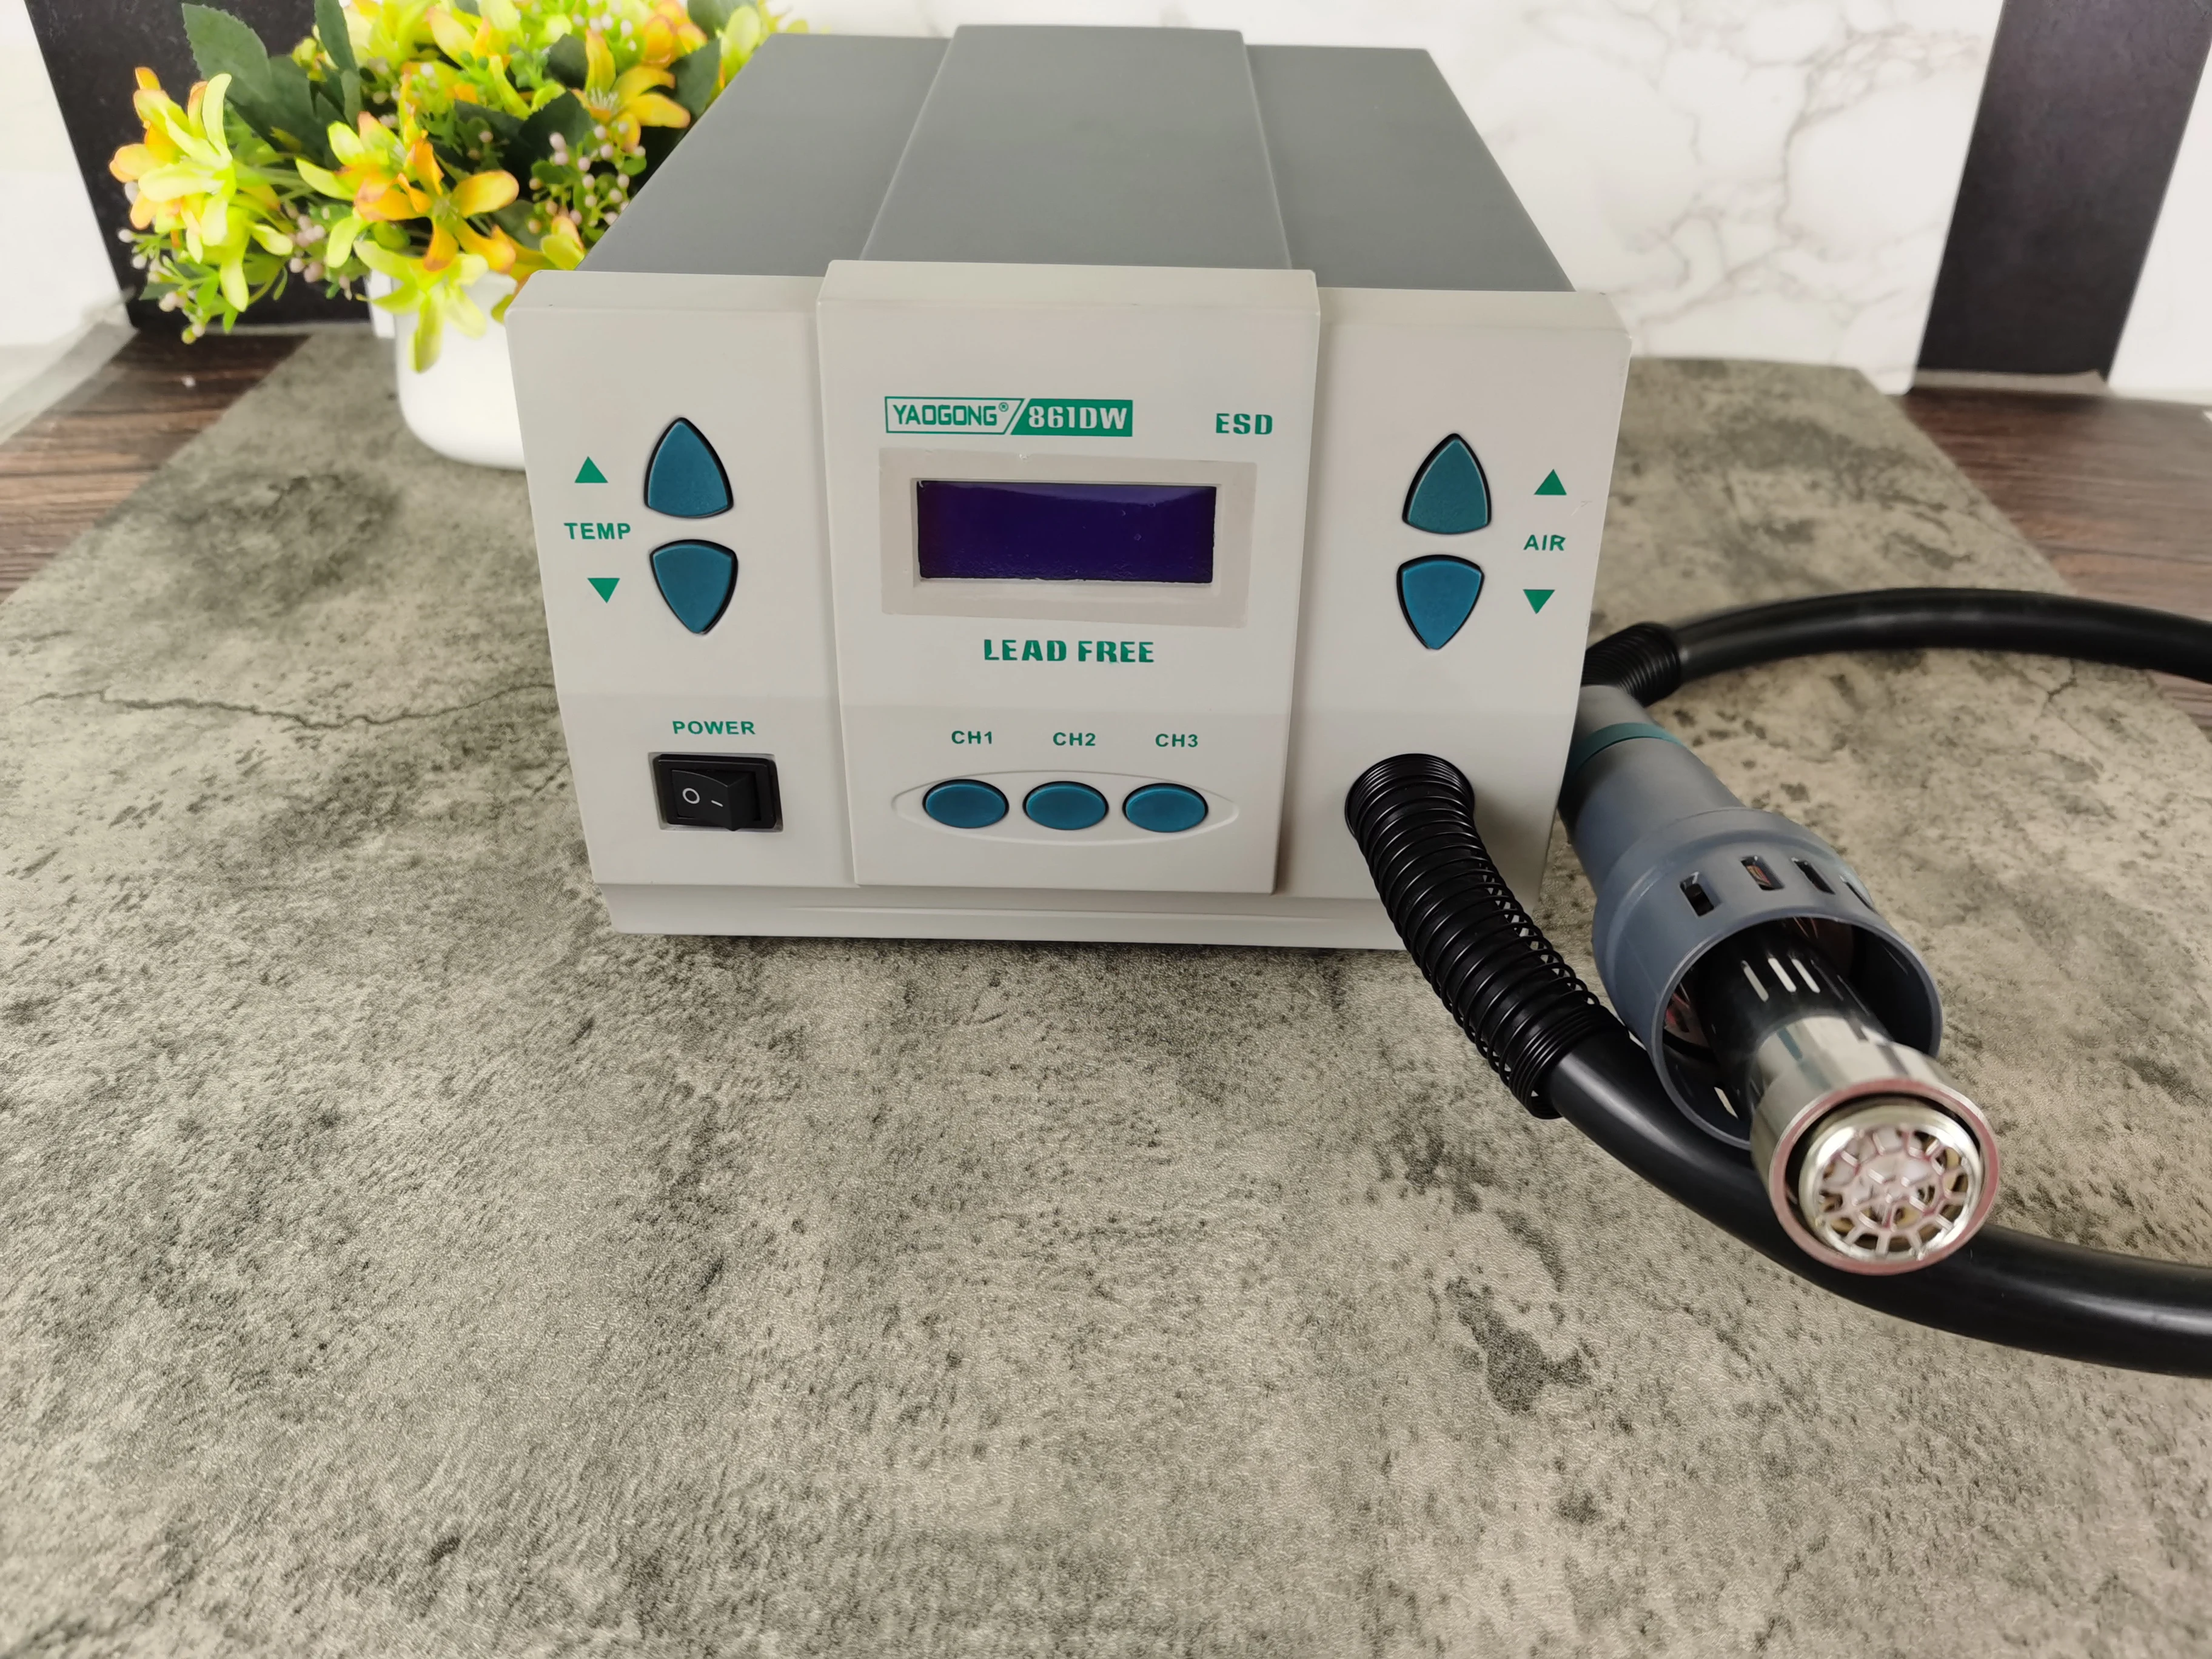 

220V 110V YAOGONG 861DW 1000W Hot Air Rework Station PCB Soldering Repair Tool with Replaceable 3 Heat Gun Nozzle